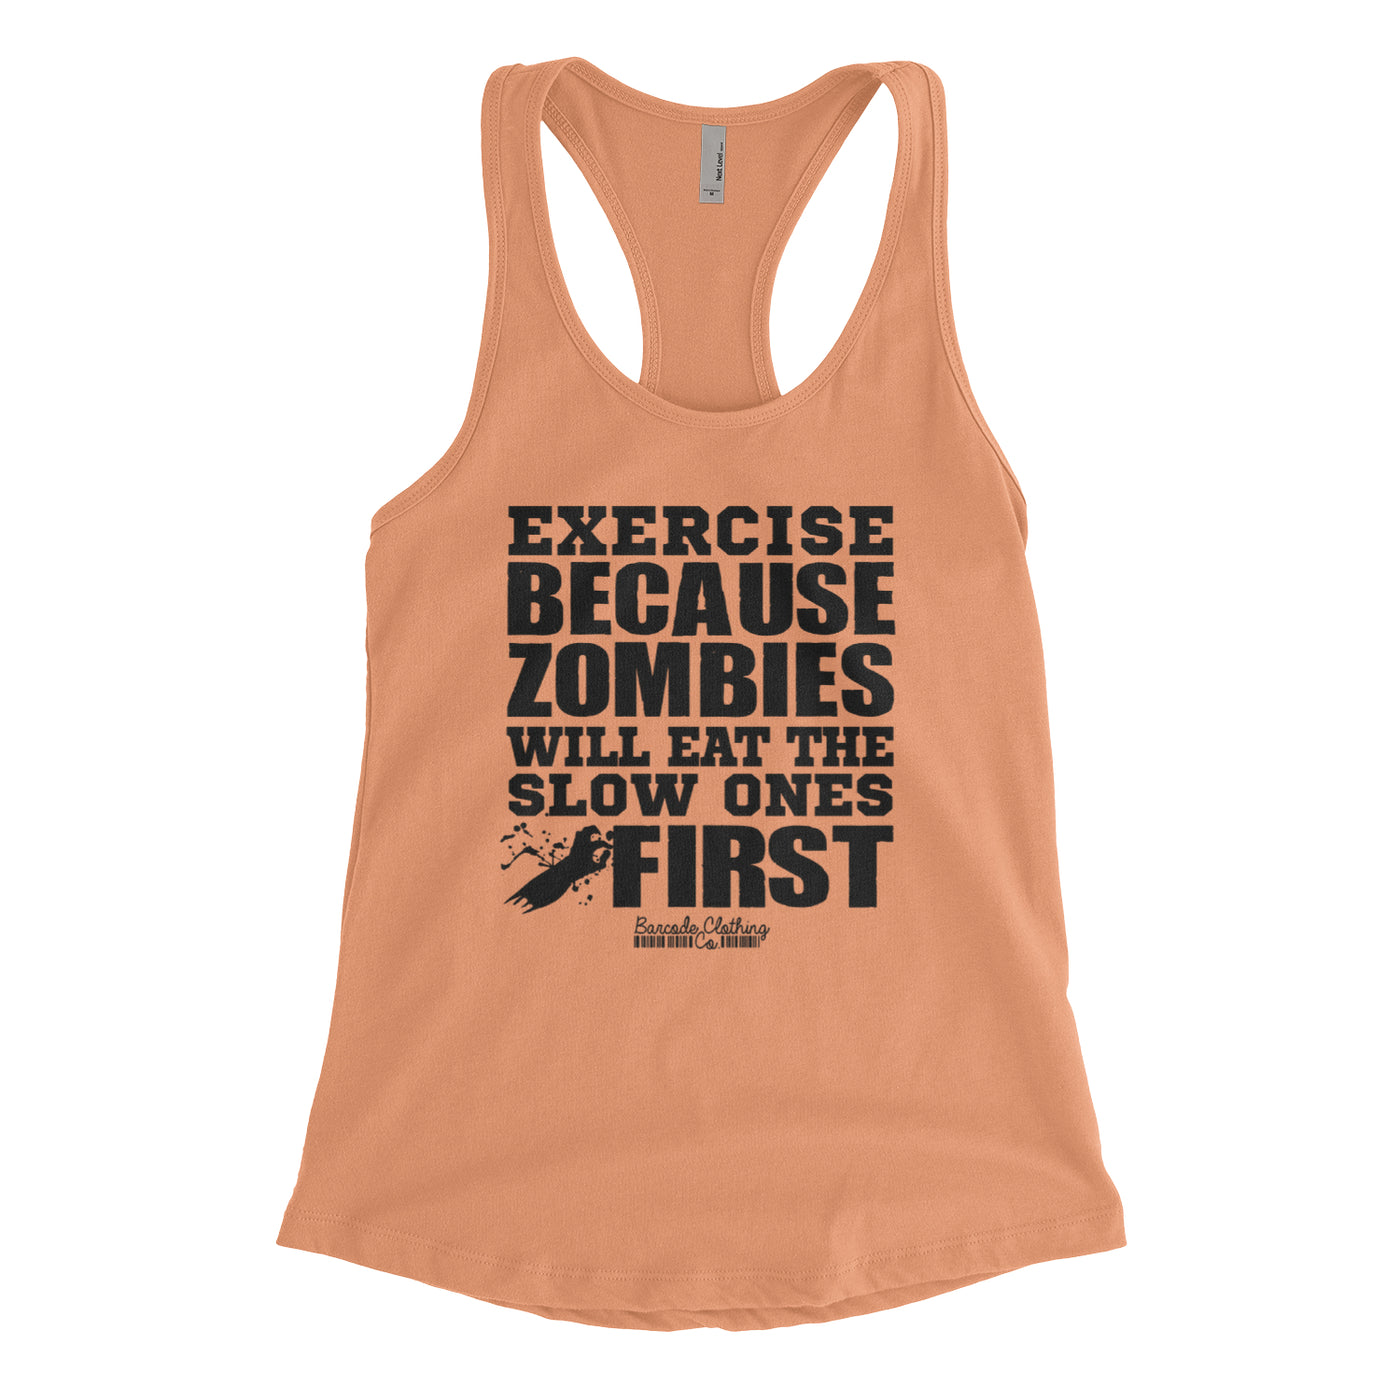 Exercise Because Zombies Blacked Out